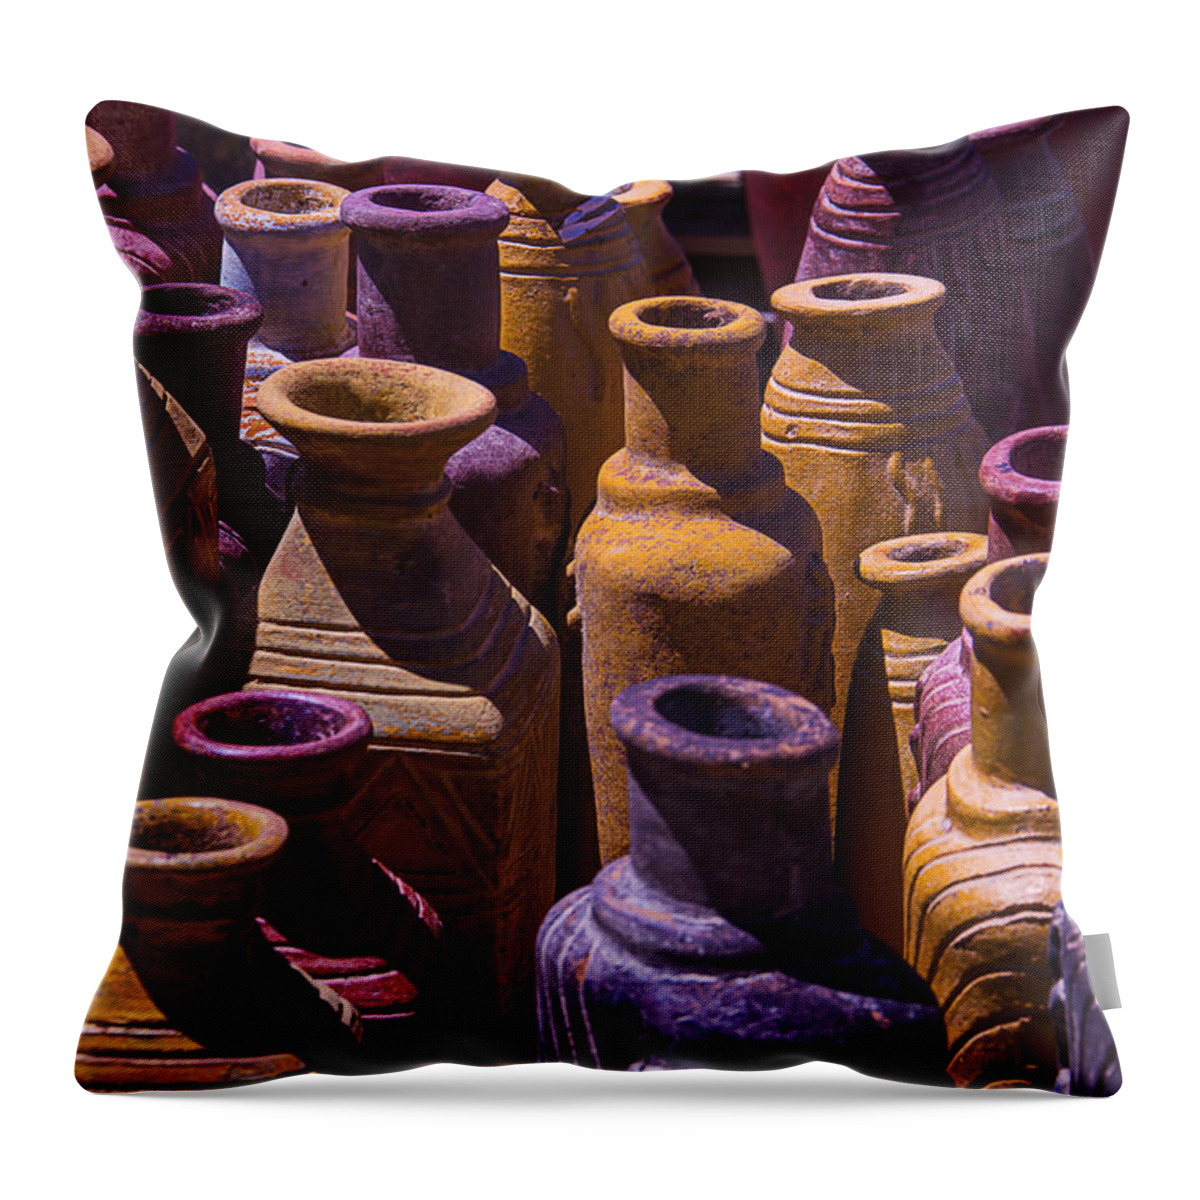 Clay Throw Pillow featuring the photograph Clay Vases by Garry Gay